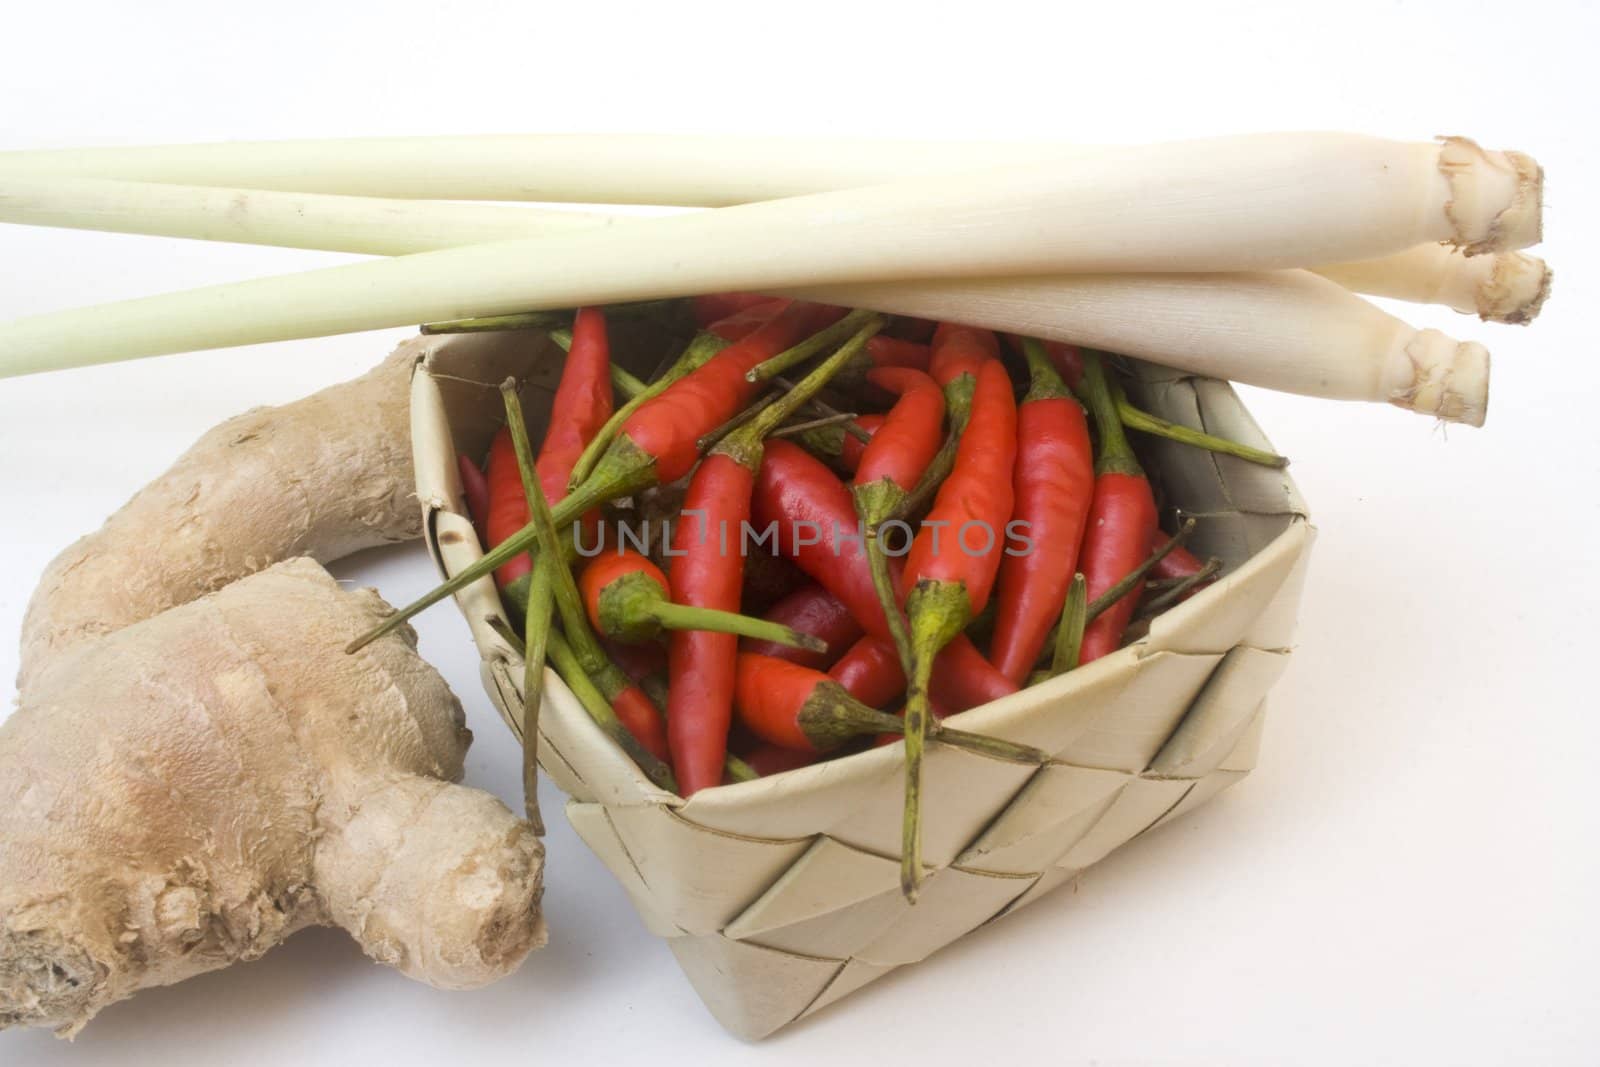 Basket of small chili peppers, ginger root, and lemon grass isolated on white